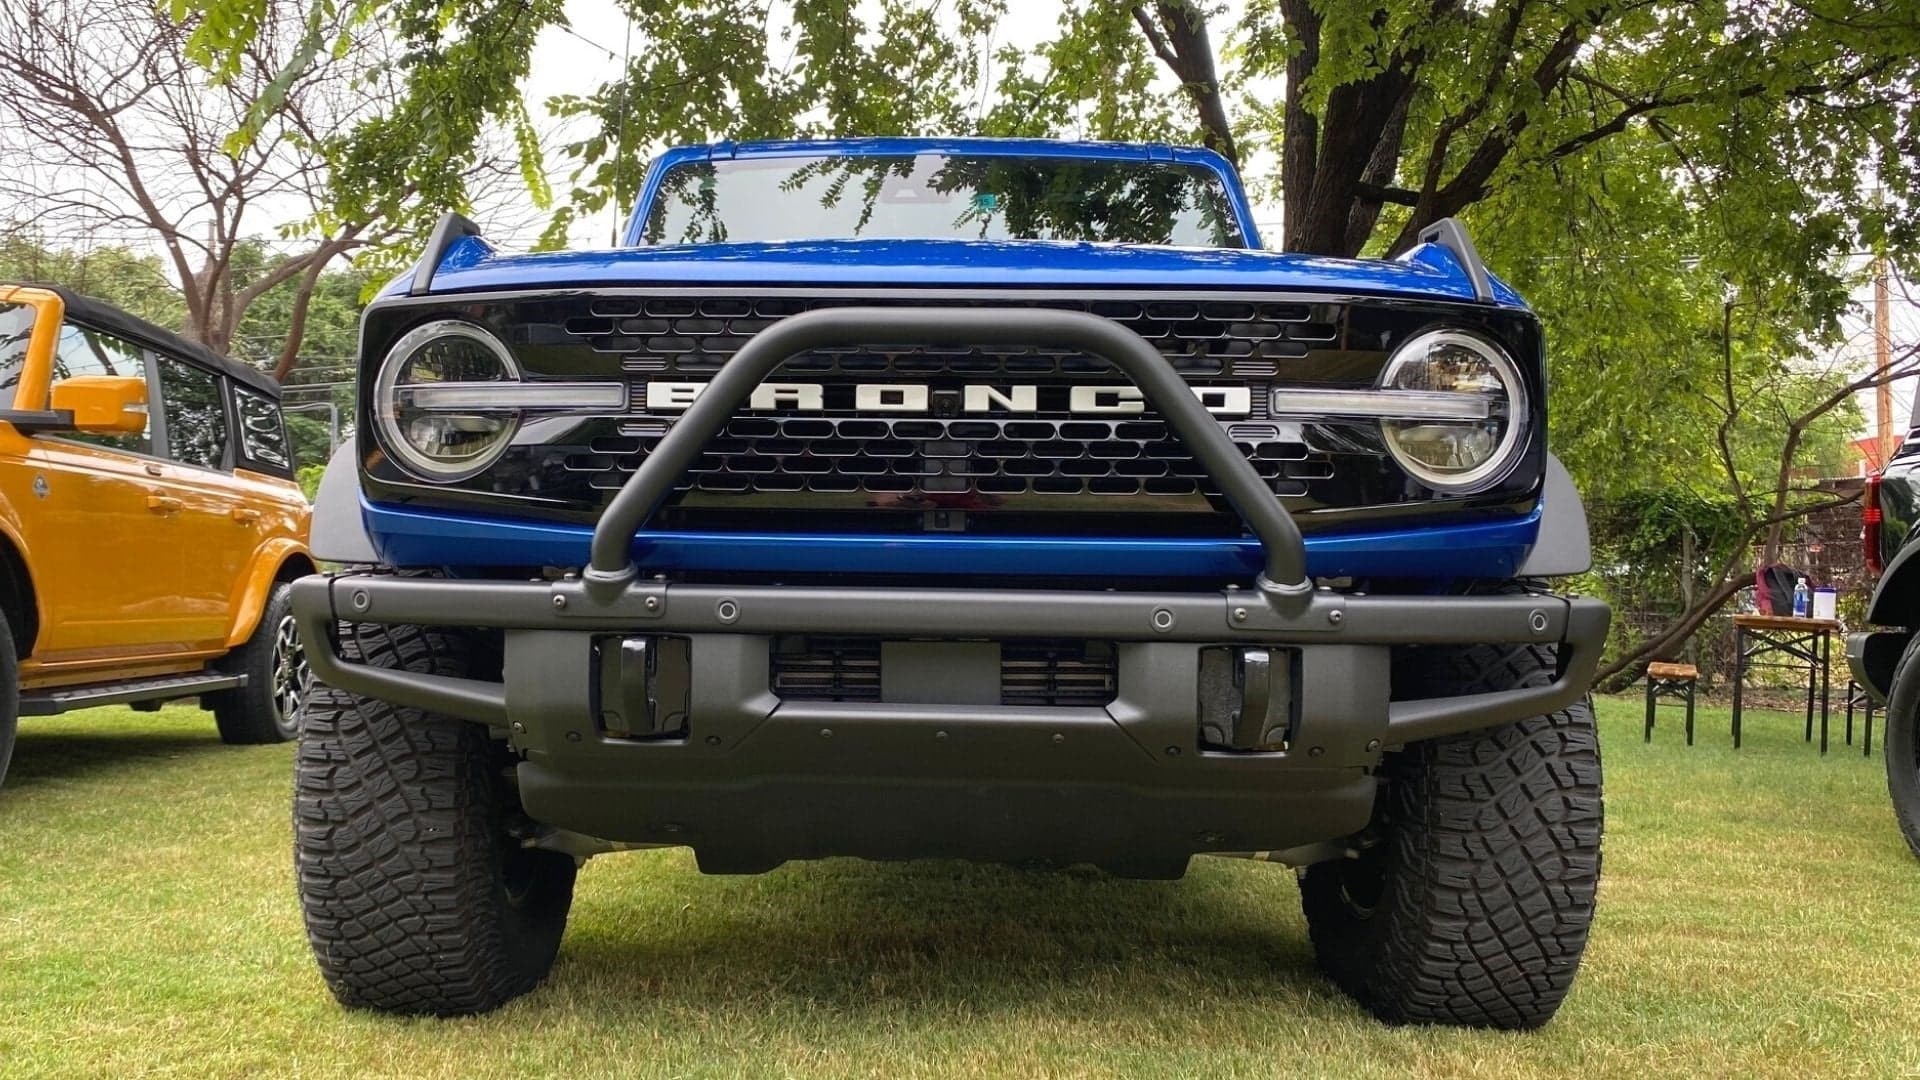 Here’s the Ford Bronco Tailgating Gear You’ll Want This Fall